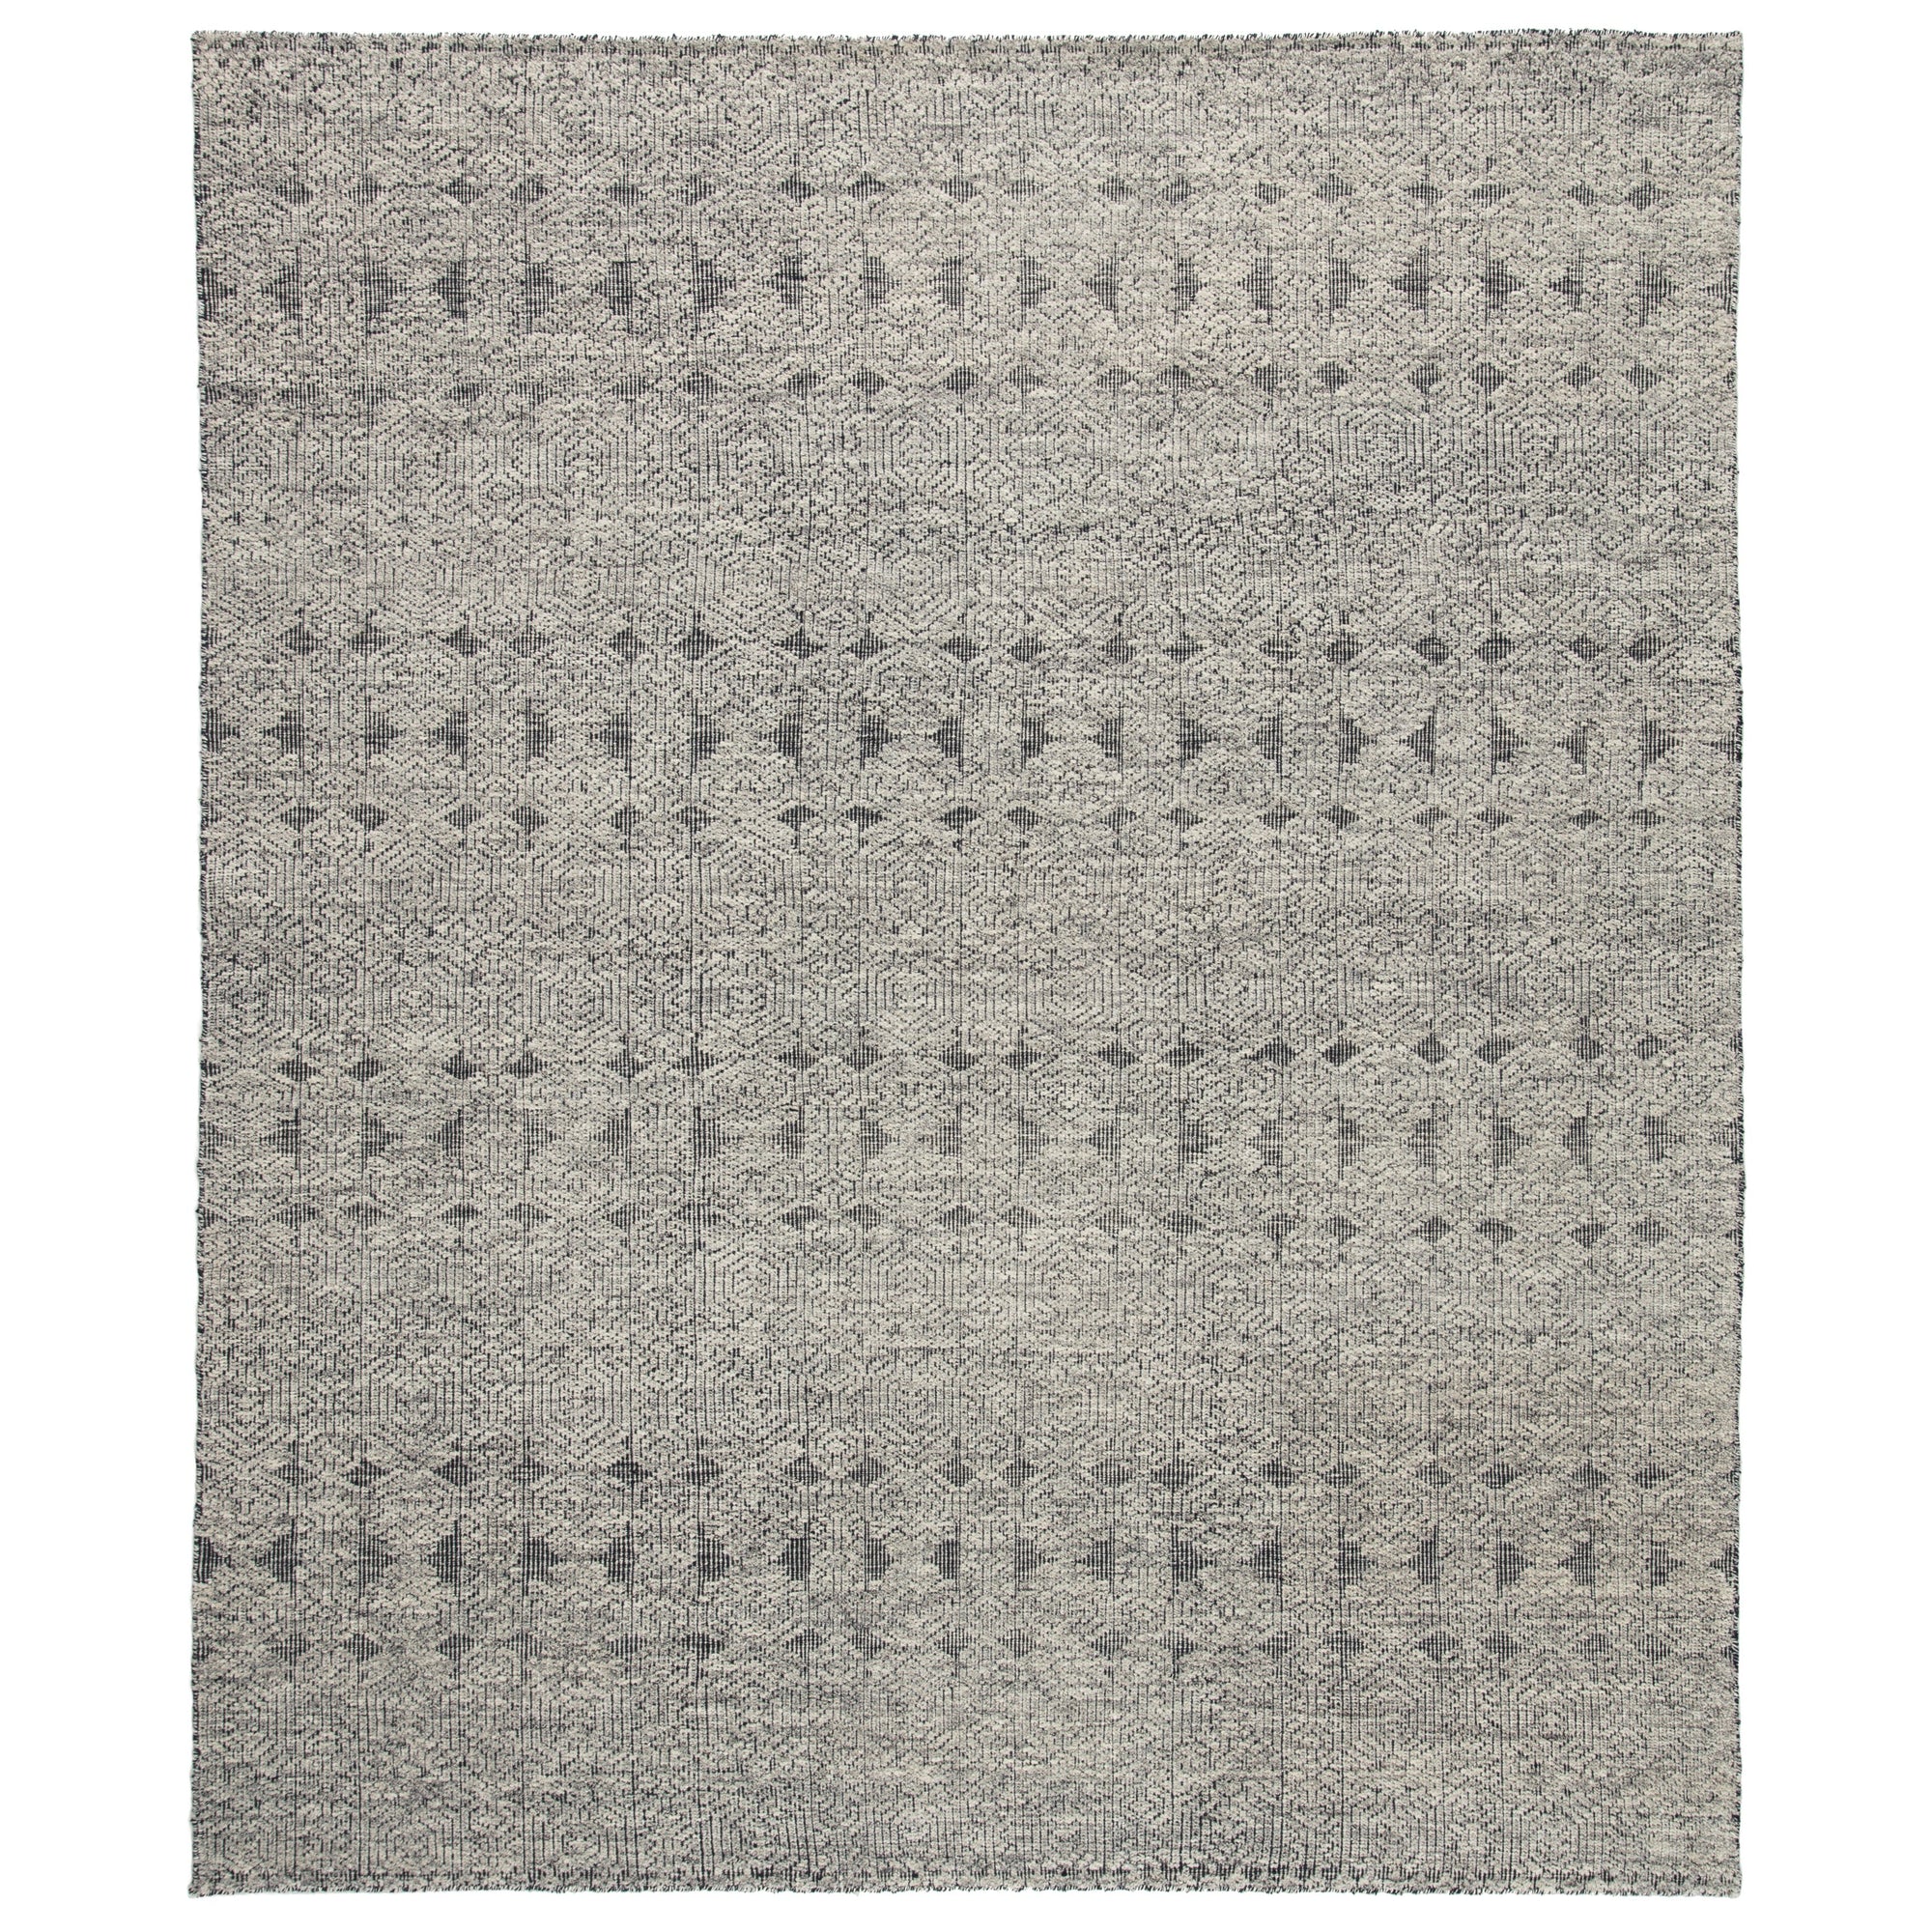 Rugs by Roo | Jaipur Living Abelle Hand-Knotted Tribal Gray Black Area Rug-RUG144750